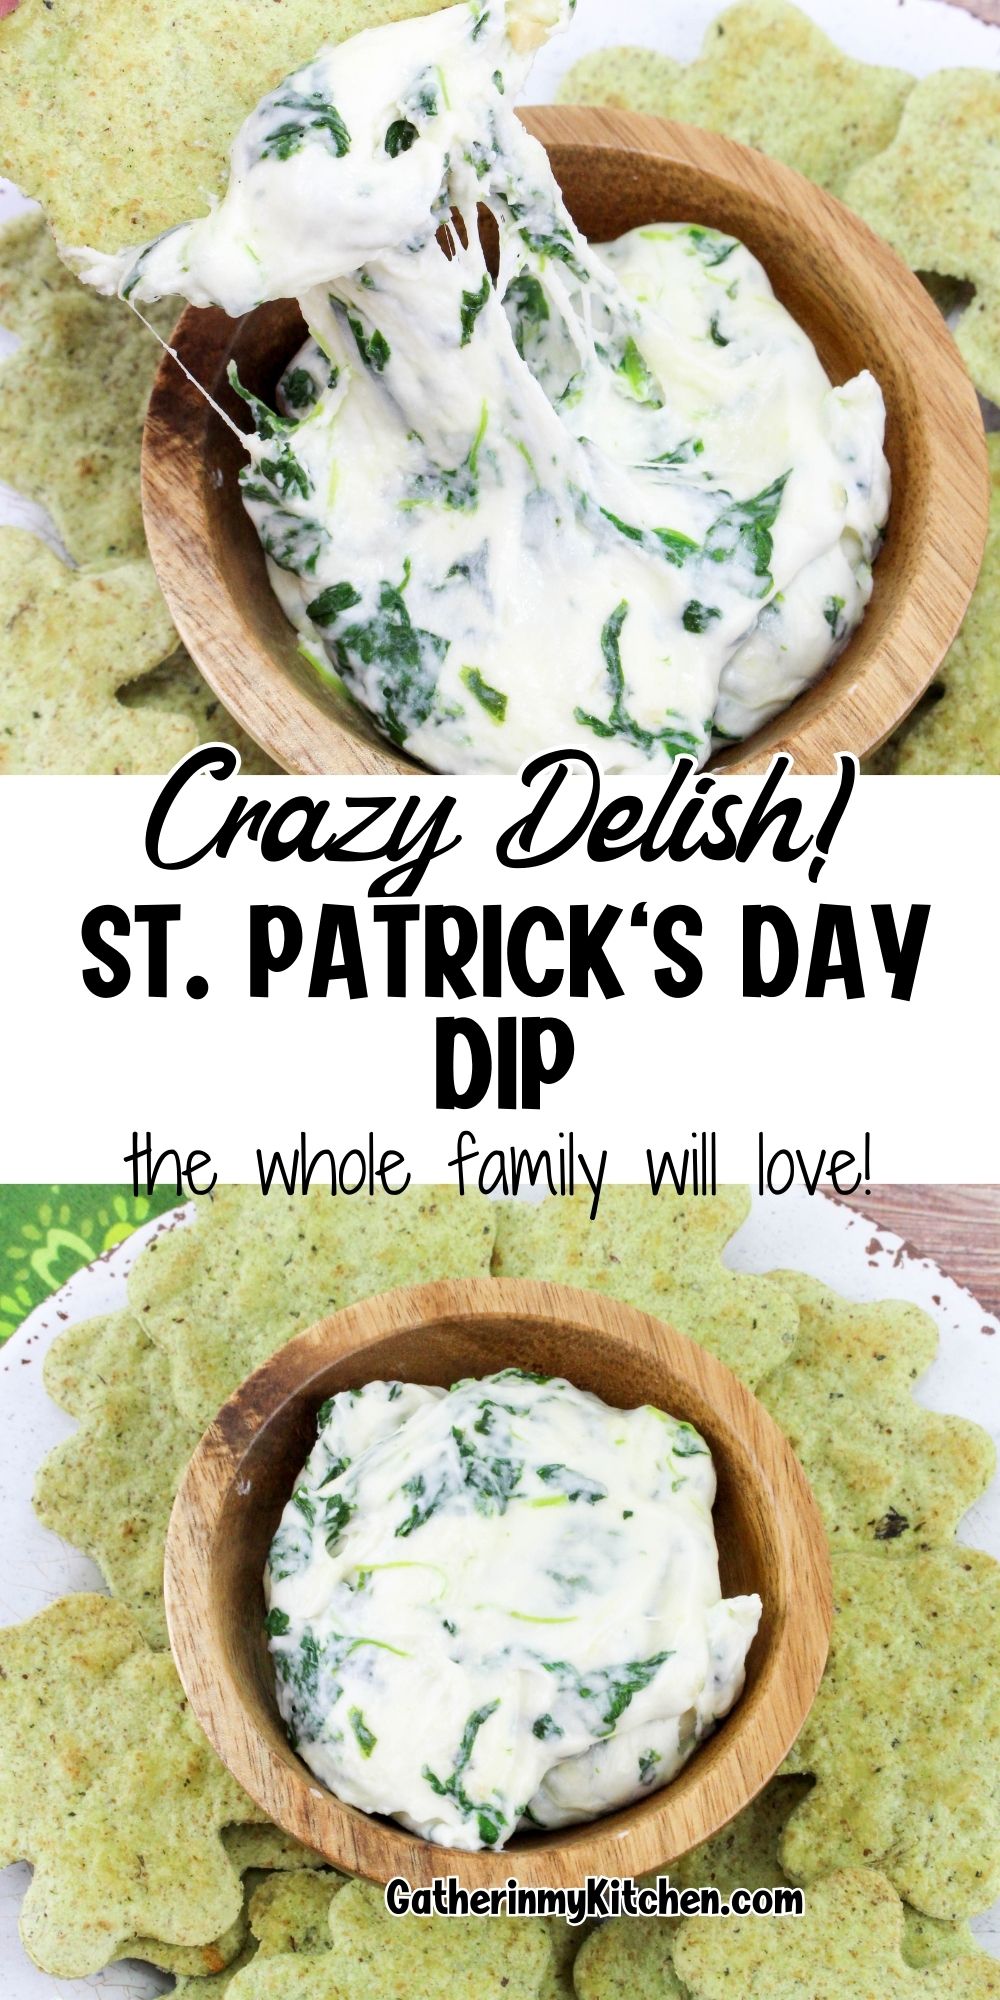 Pin Image: top and bottom have the cheesy spinach dip with 4 leaf clover chips, middle says "Crazy Delish! St. Patrick's Day Dip the whole family will love".